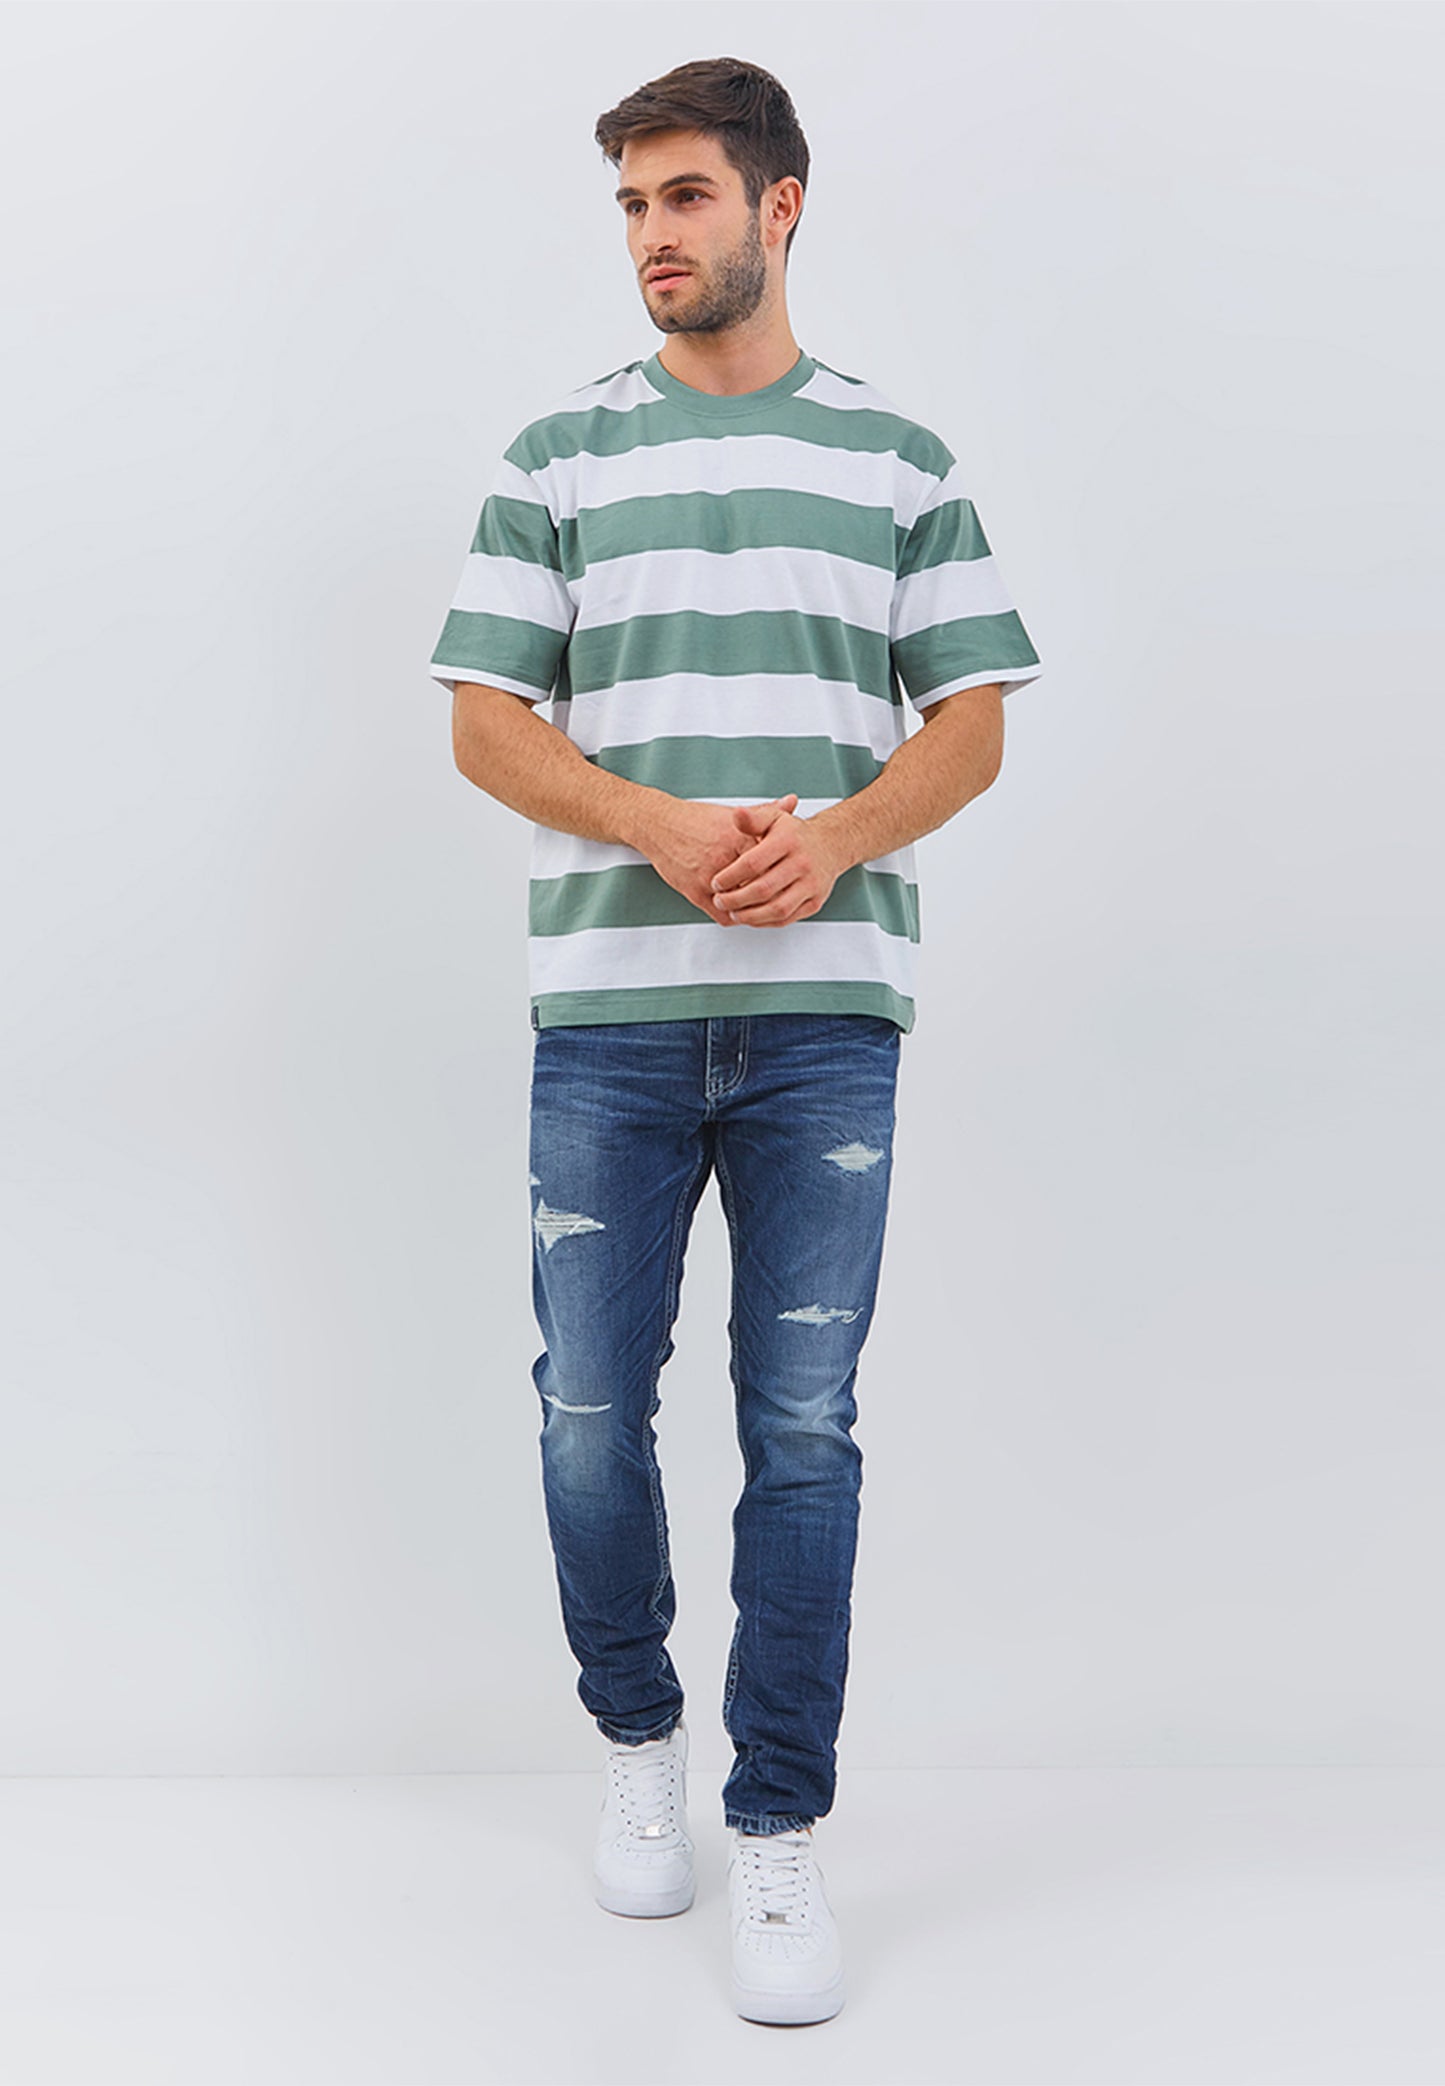 Osella Oversized Striped T-Shirt In Wasabi Green And White